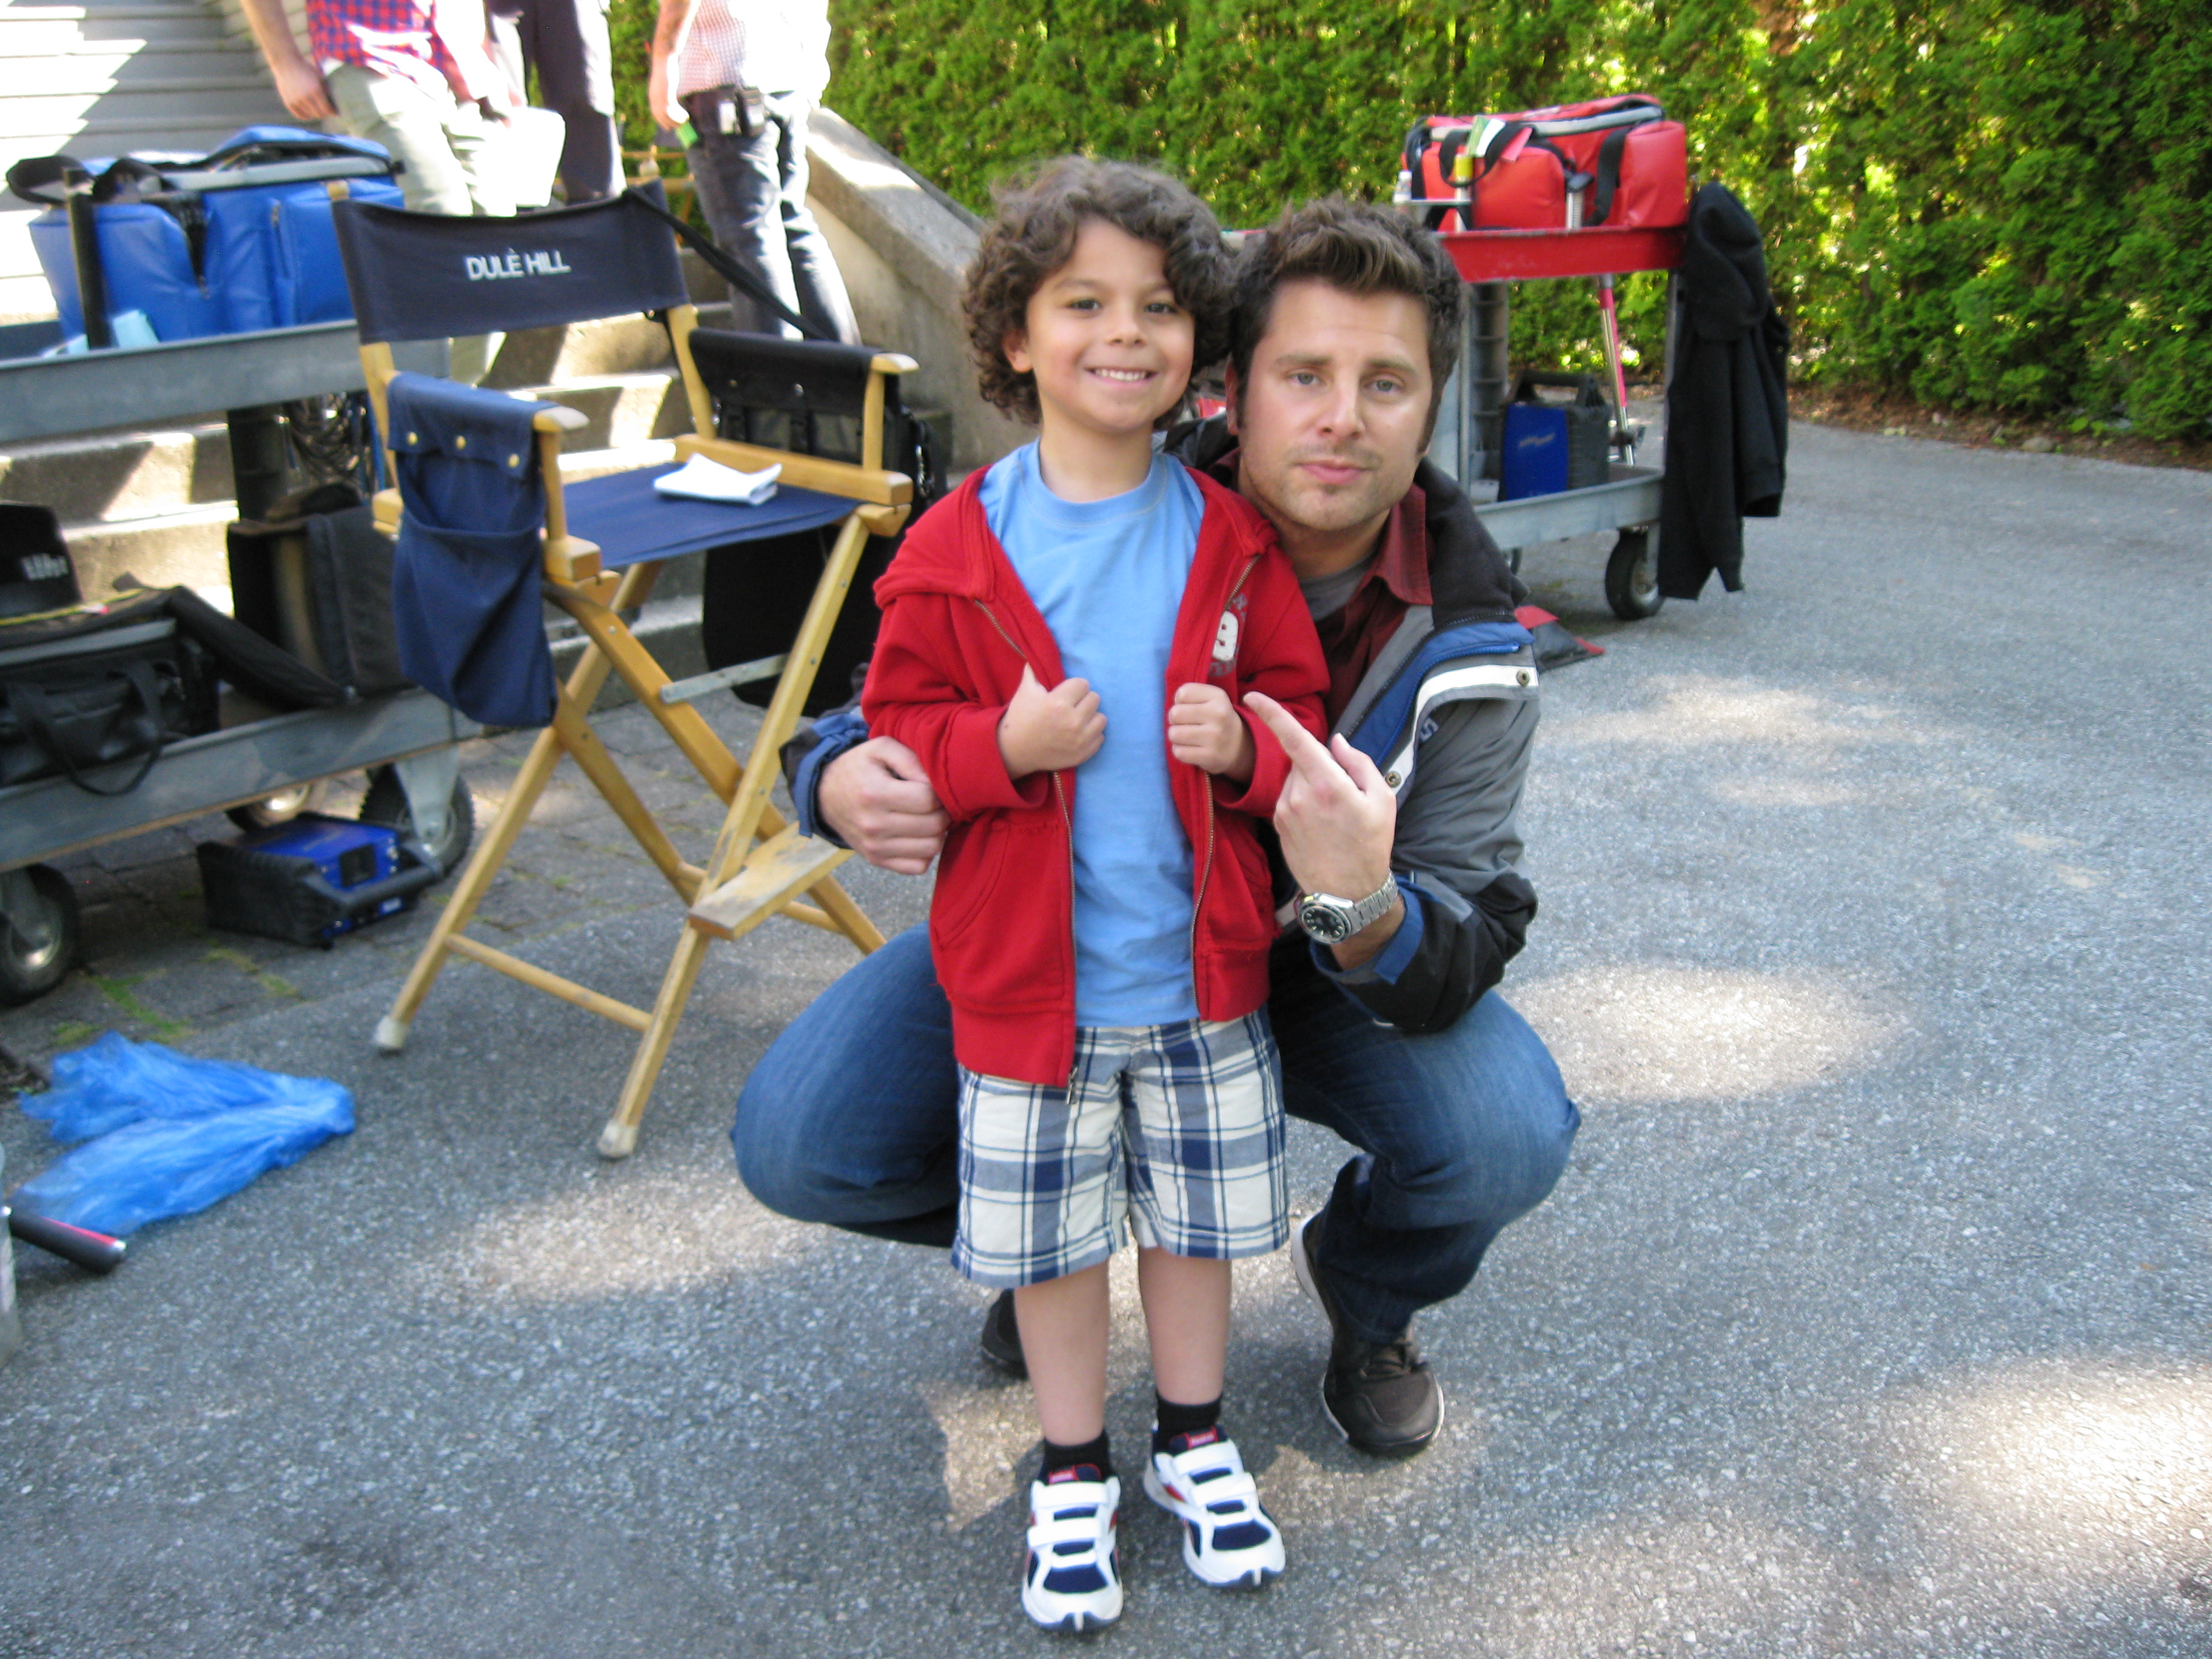 Bruce onset of Psych with James Roday